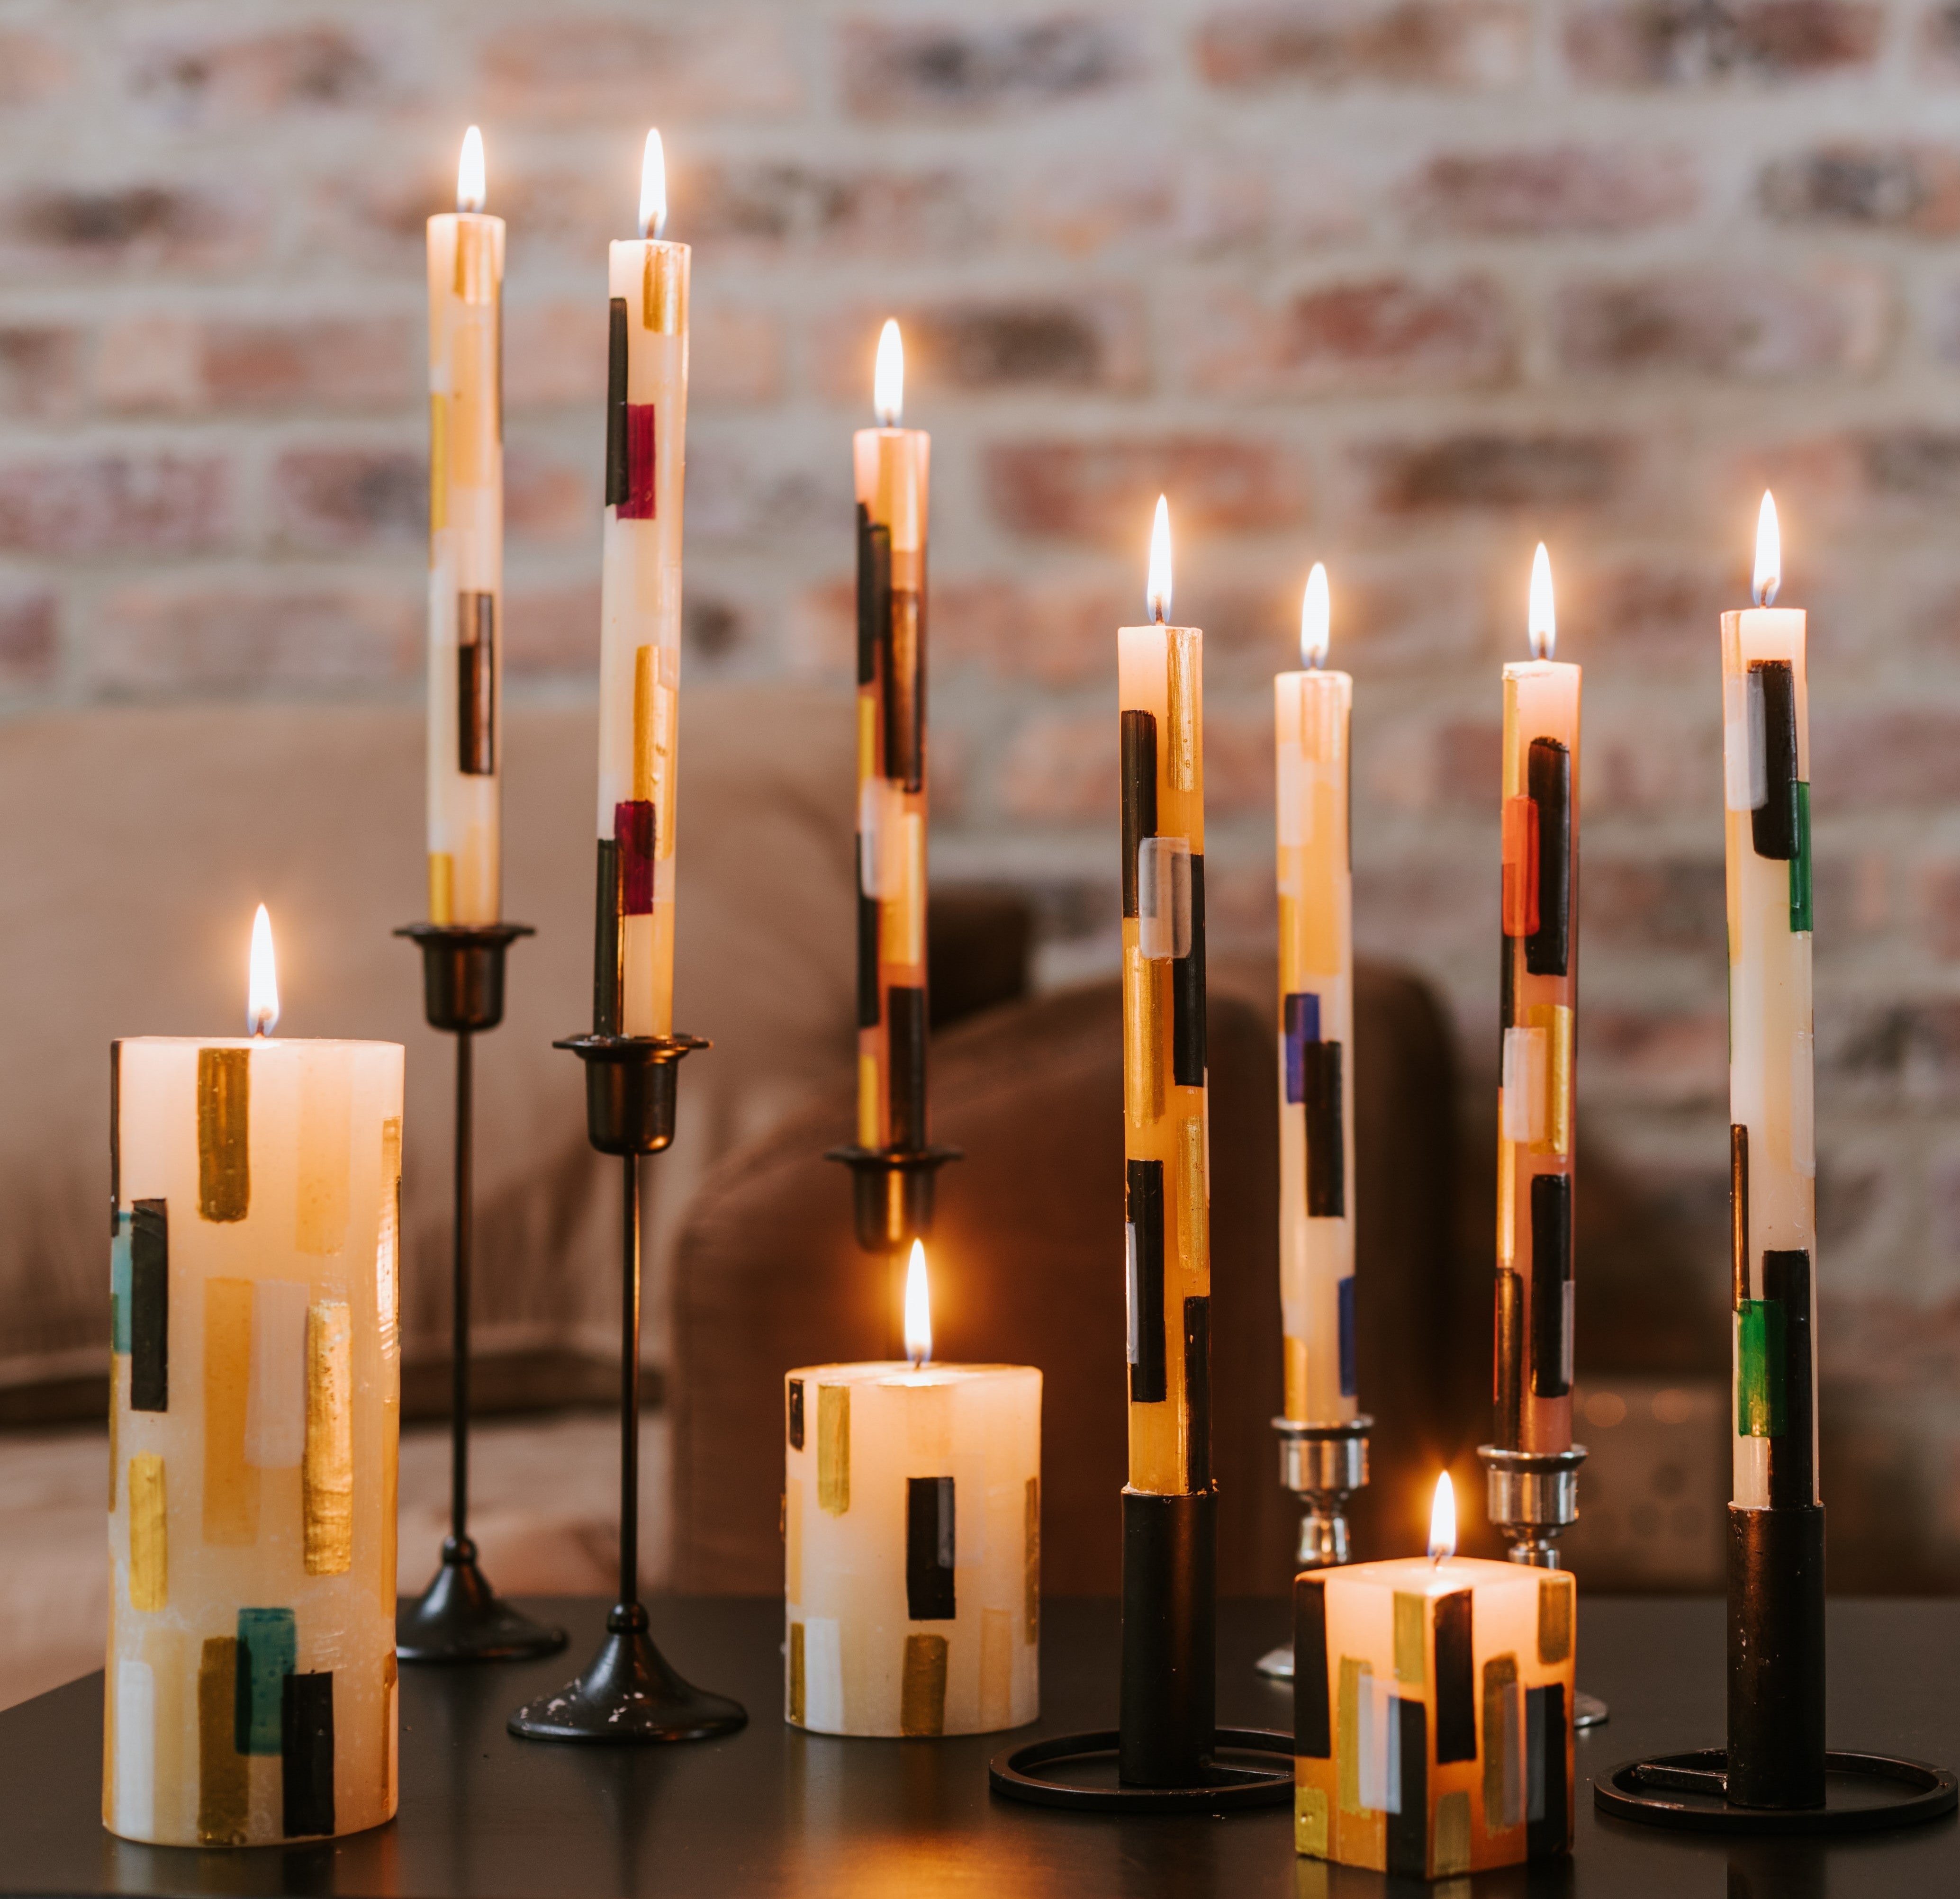 Lifestyle photo of the Klimt collection; tapers 3x8 pillar, 3x4 pillar, and 2x2x3 cube. Tapers are all different heights and all candles are lit with a soft brick wall in the background - just beautiful!